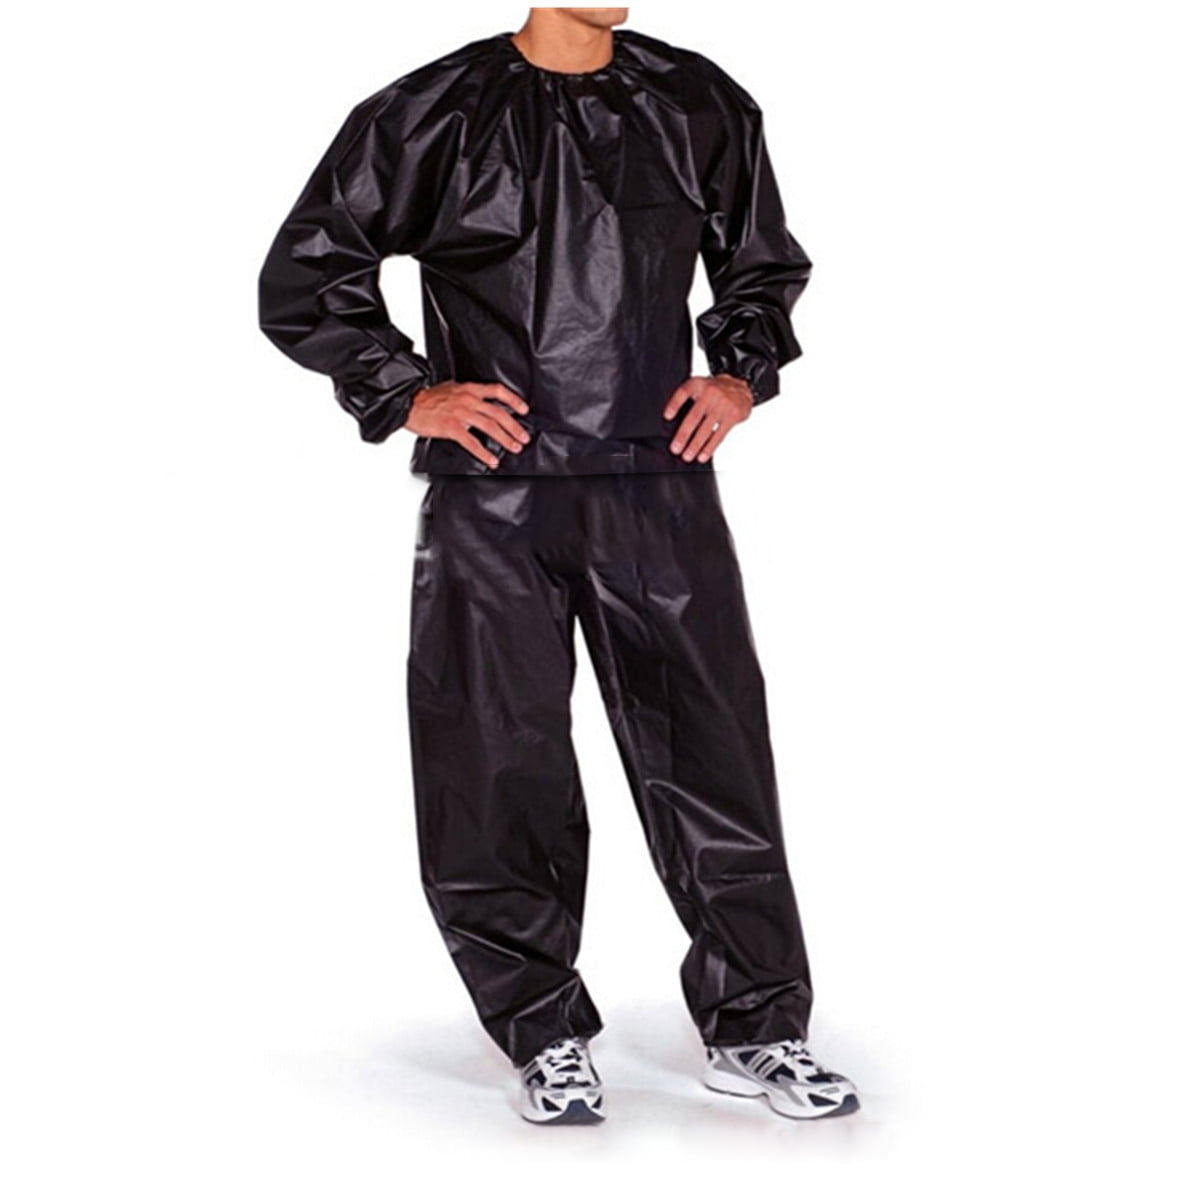 Double Heated Sauna Sweat Suit for WEIGHT LOSS Burn FAT MMA FIGHT BOXING Gym Men 